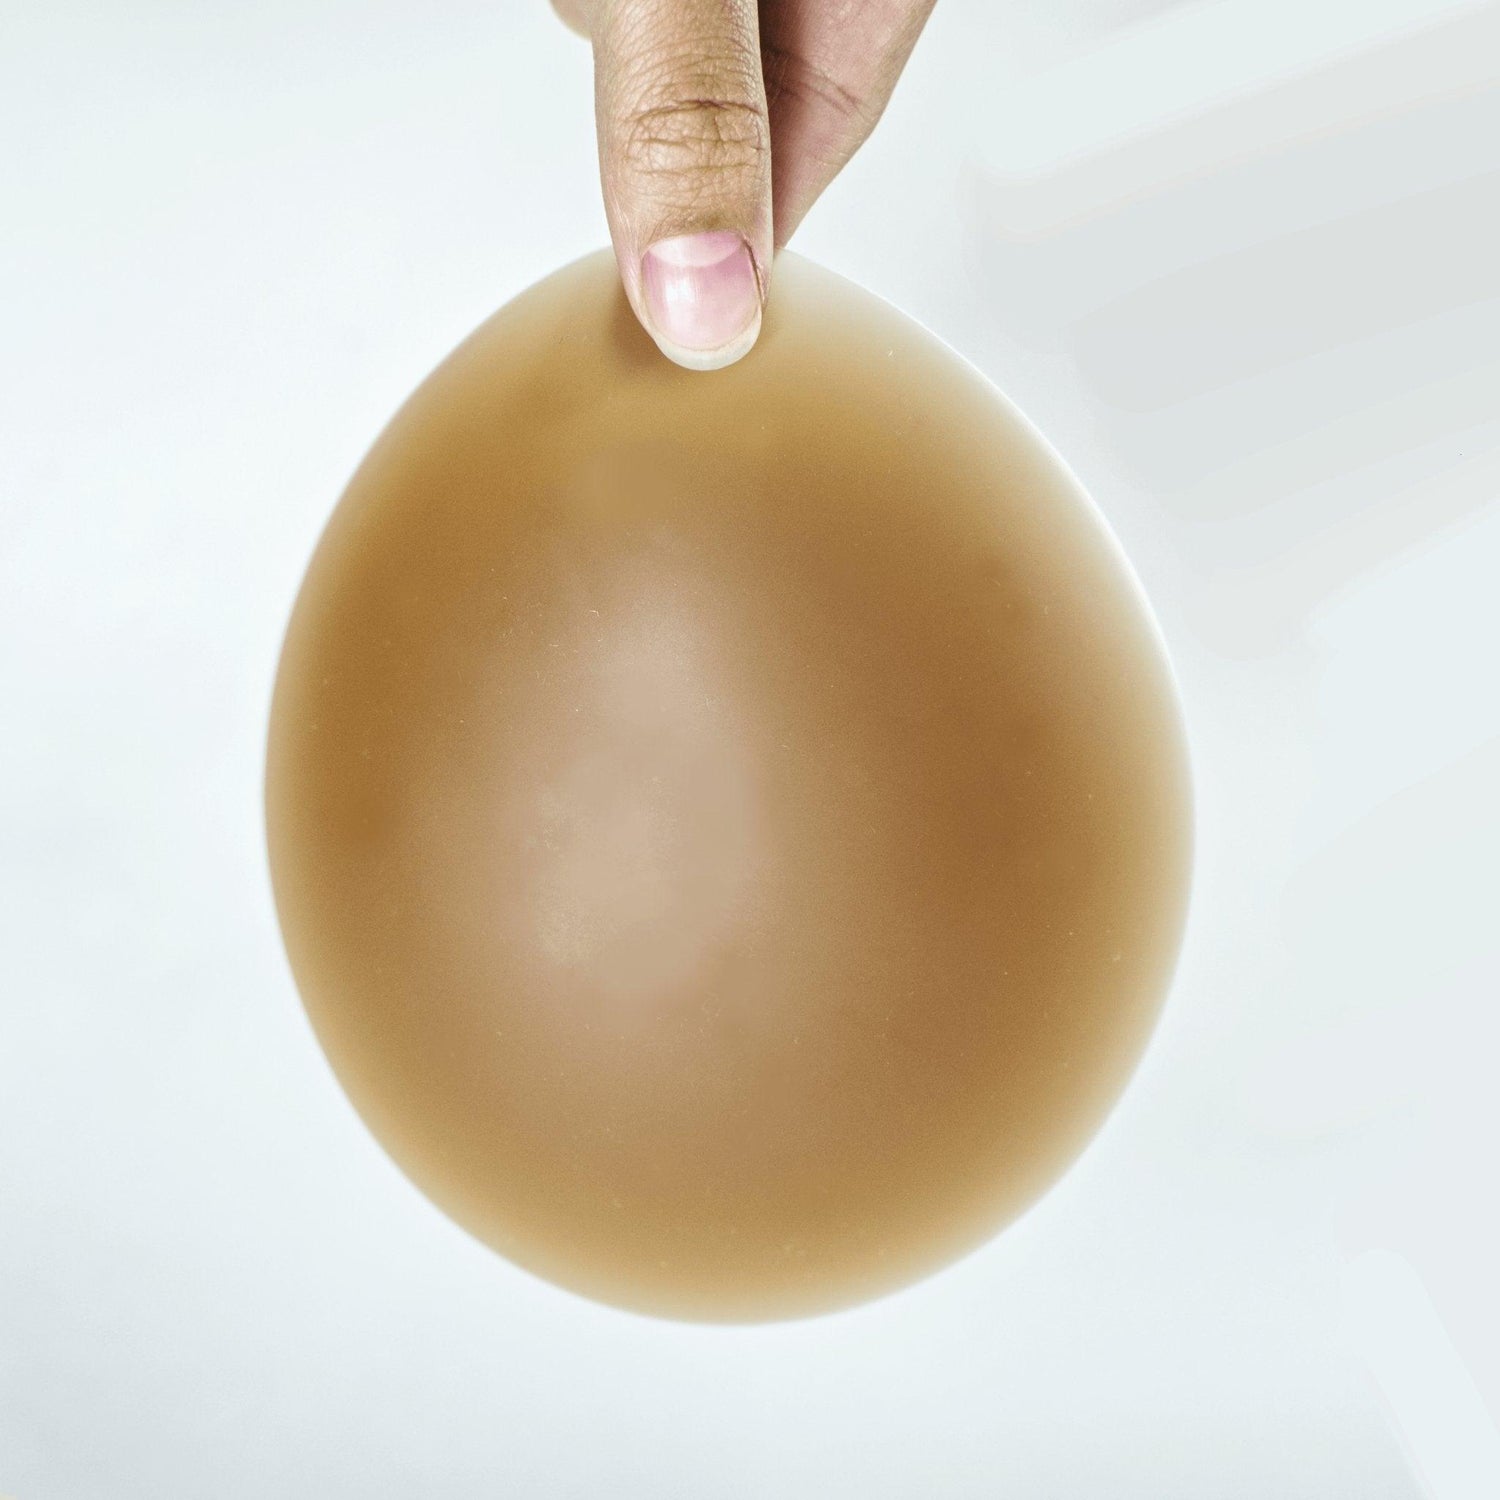 XXL Oversized Silicone Breast Forms B-Z Cup Fake Boobs